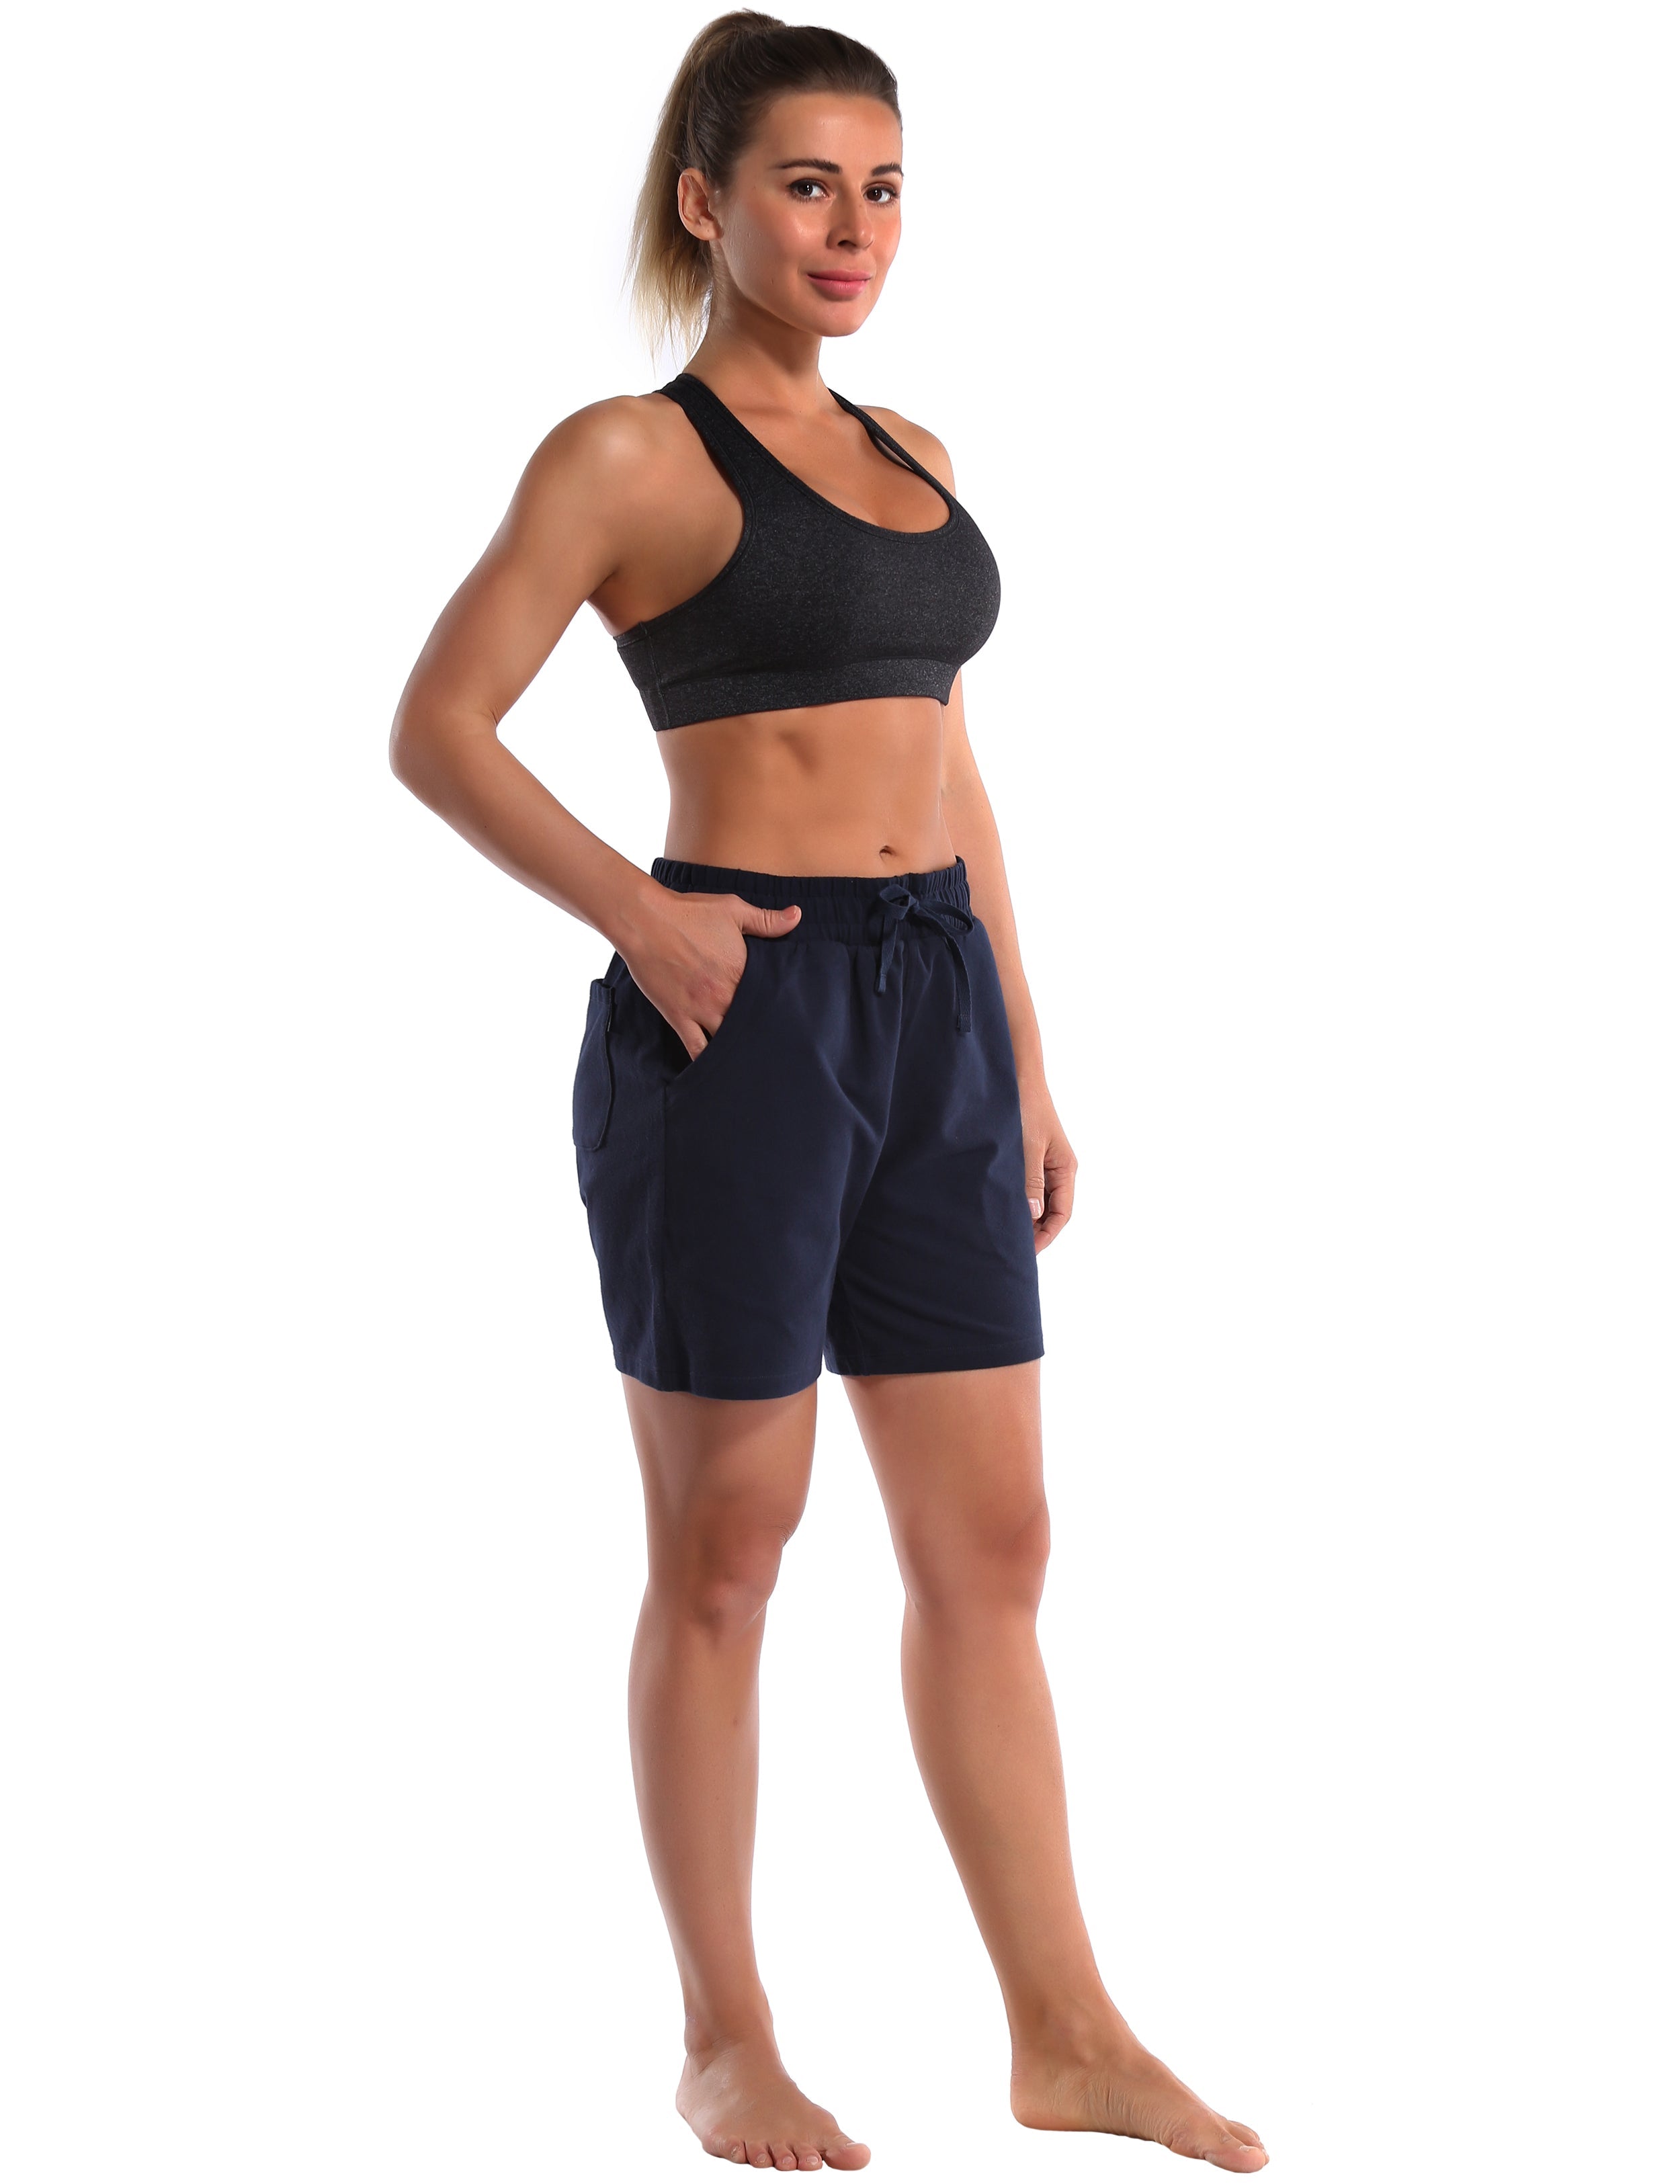 5" Joggers Shorts darknavy 90% Cotton, 10% Spandex Soft and Elastic Drawstring closure Lightweight & breathable fabric wicks away sweat to keep you comfortable Elastic waistband with internal drawcord for a snug, adjustable fit Big side pockets are available for 4.7", 5", 5.5" mobile phone Reflective logo helps you stand out in low light Perfect for any types of outdoor exercises and indoor fitness,like Jogging,running,walking,jogging,lounging,workout,gym fitness,casual use,etc